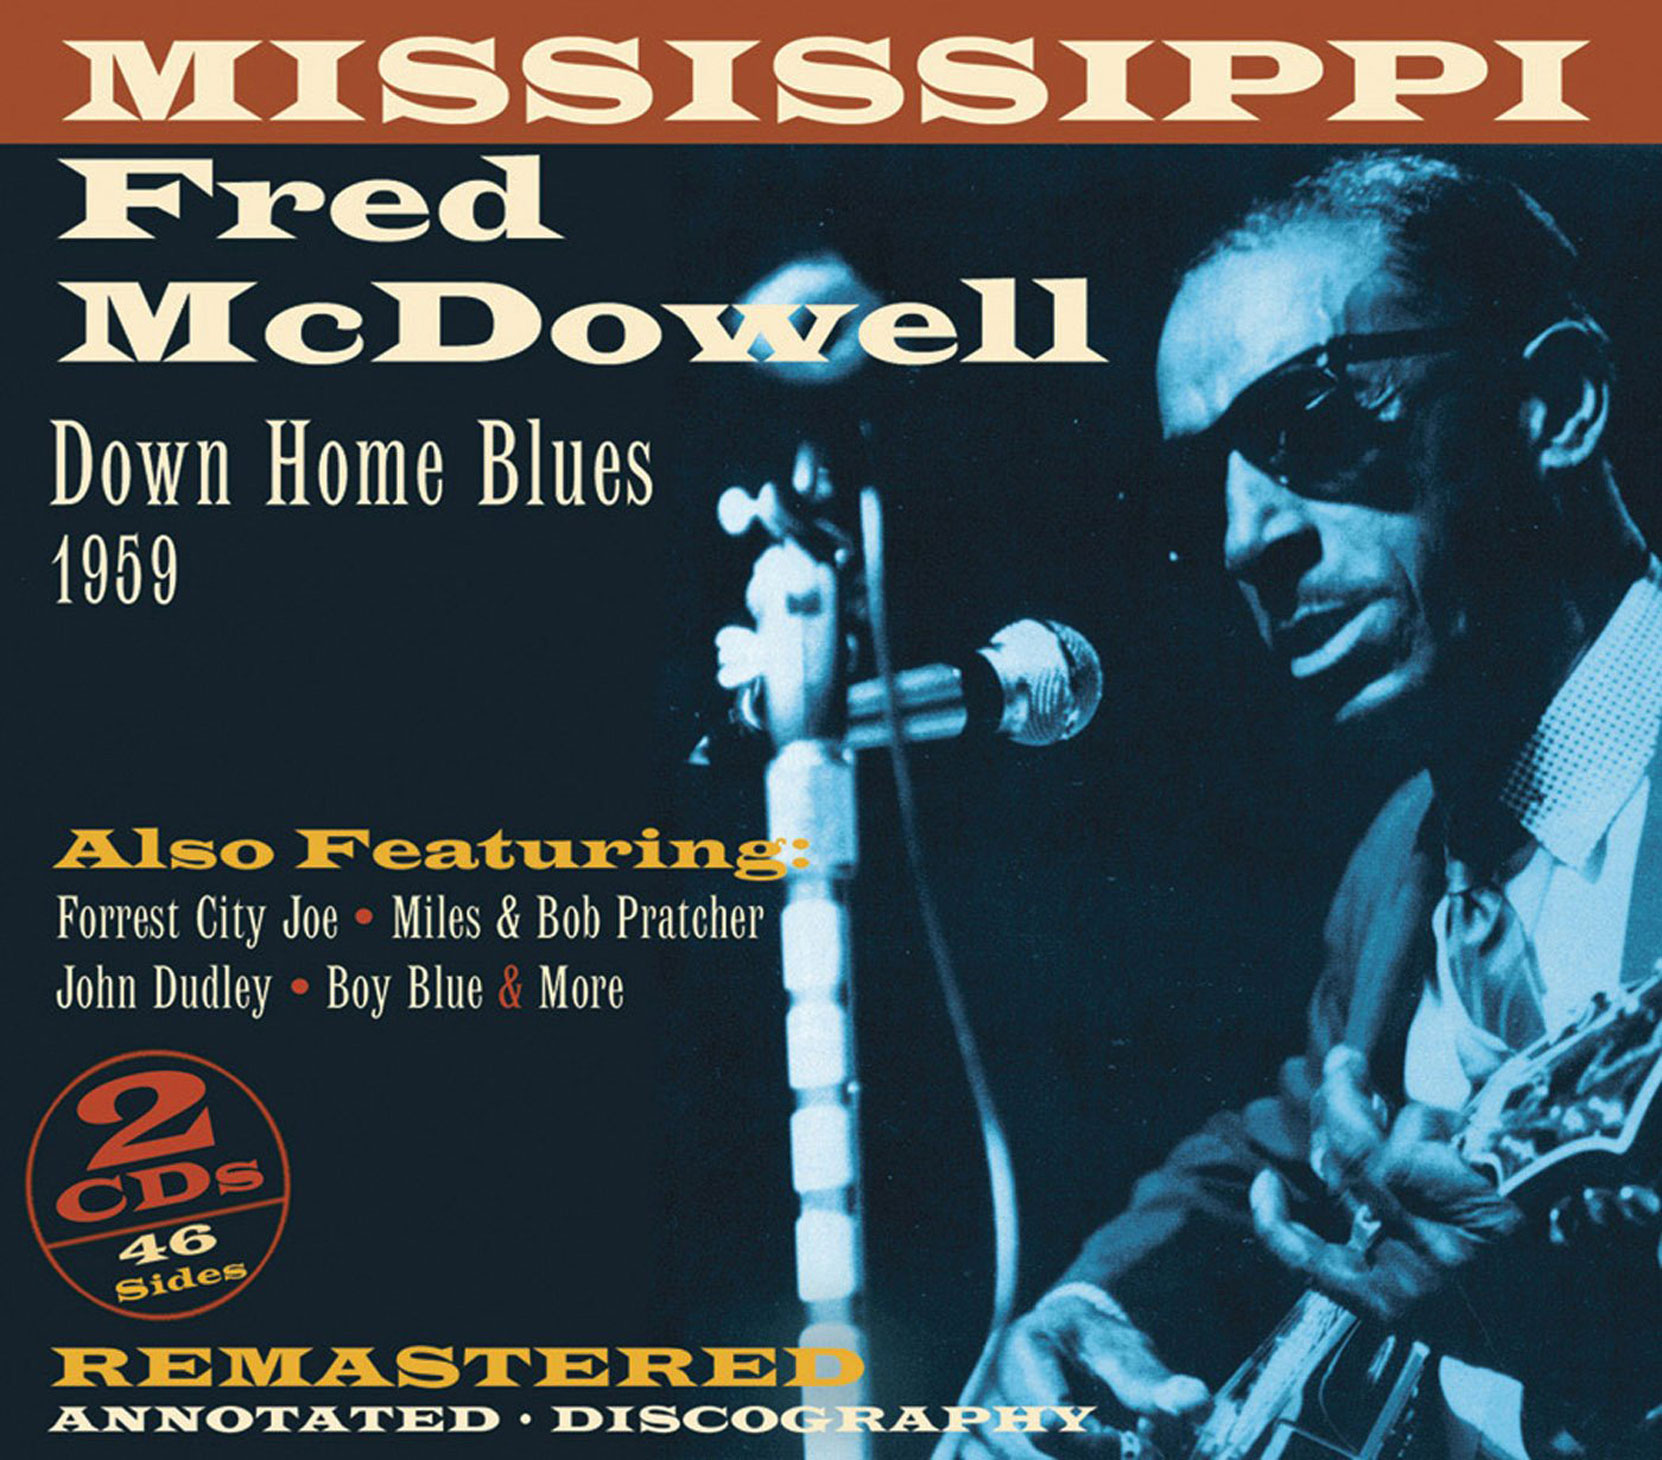 CD cover, Down Home Blues 1959 by Mississippi Fred McDowell, on JSP Records. This 2 CD set contains the complete 1959 Alan Lomax recordings of Mississippi Fred McDowell.